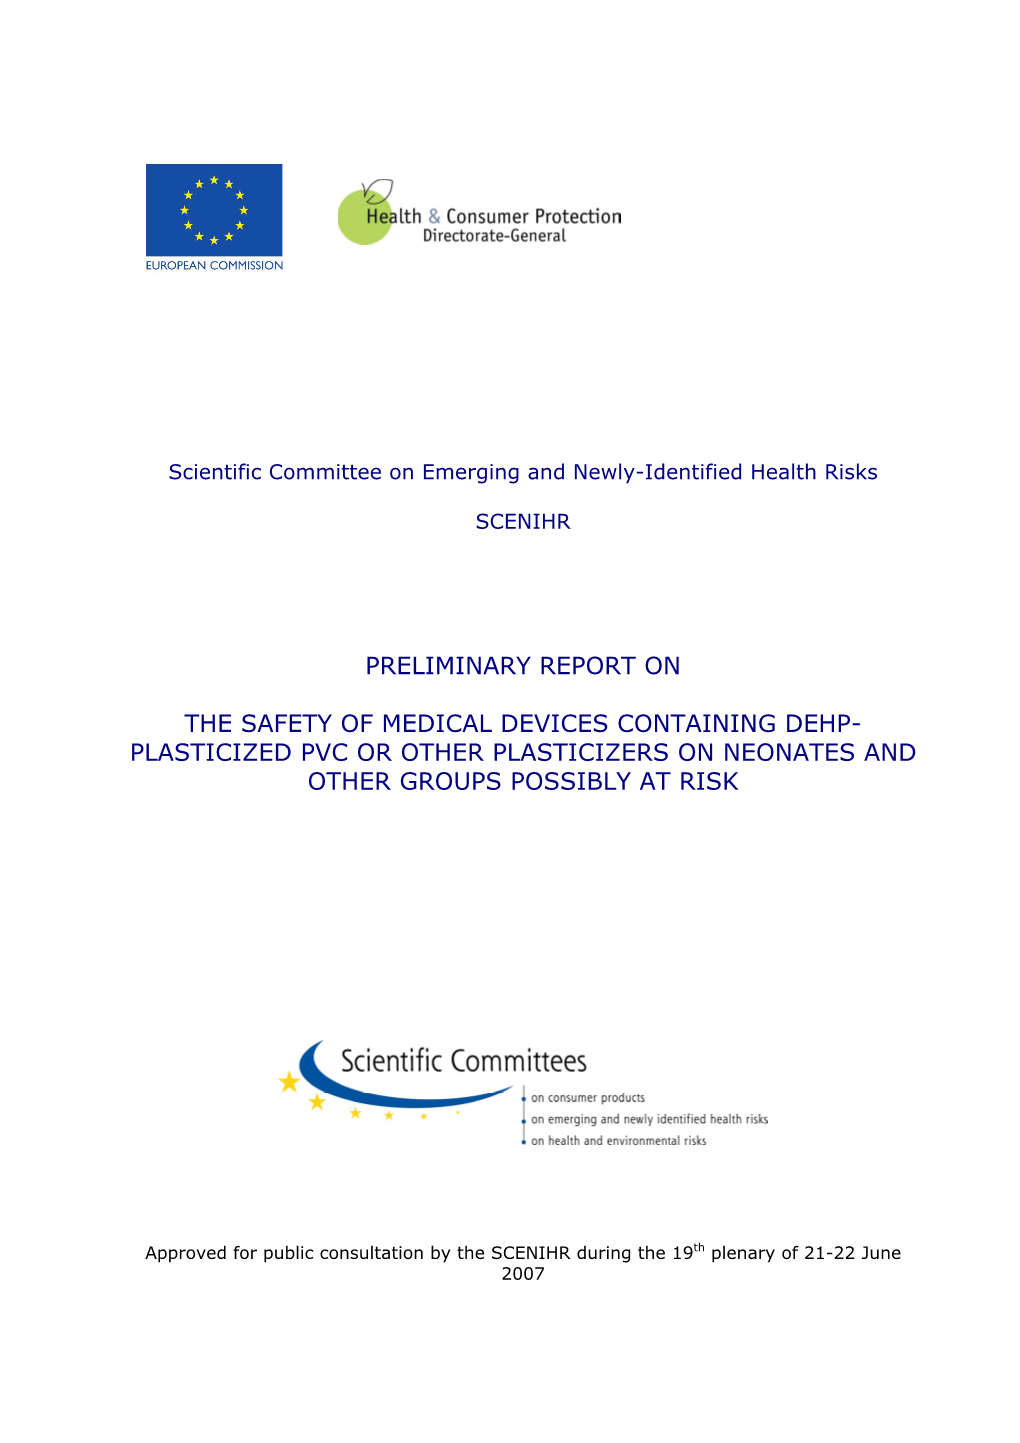 Preliminary Report on the Safety of Medical Devices